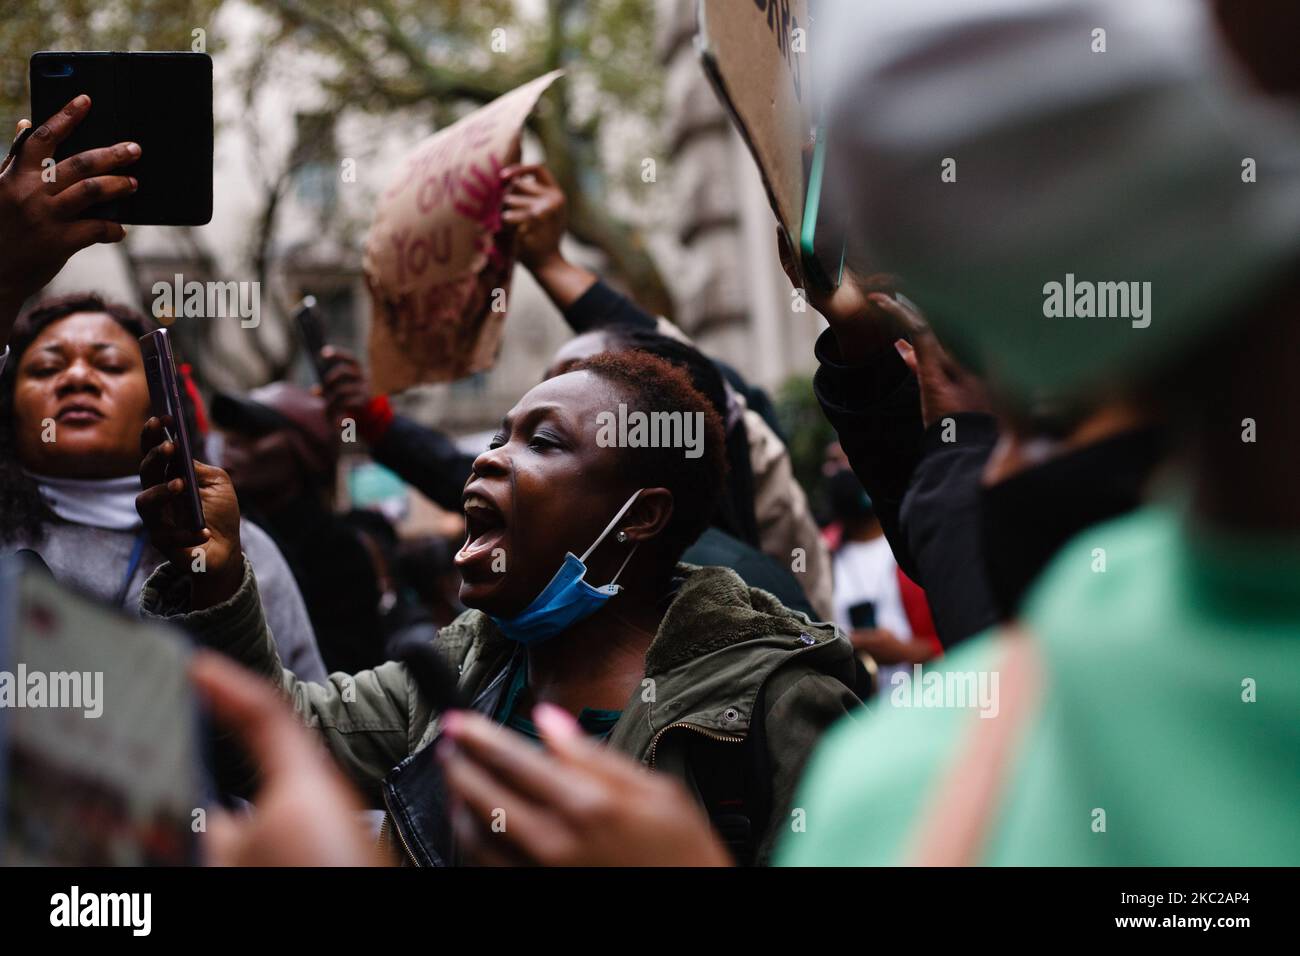 Activists protesting police brutality by the Nigerian Special Anti-Robbery Squad (SARS) demonstrate outside the Nigerian High Commission on Great Scotland Yard in London, England, on October 21, 2020. SARS has been accused of extrajudicial killings, extortion and torture, prompting demonstrations across Nigeria that have seen at least 56 people killed by Nigerian security forces in recent weeks, according to human rights group Amnesty International. The dead include at least 12 at two locations in Lagos - Lekki and Alausa - on Tuesday, it said, among some 38 people killed yesterday across the  Stock Photo